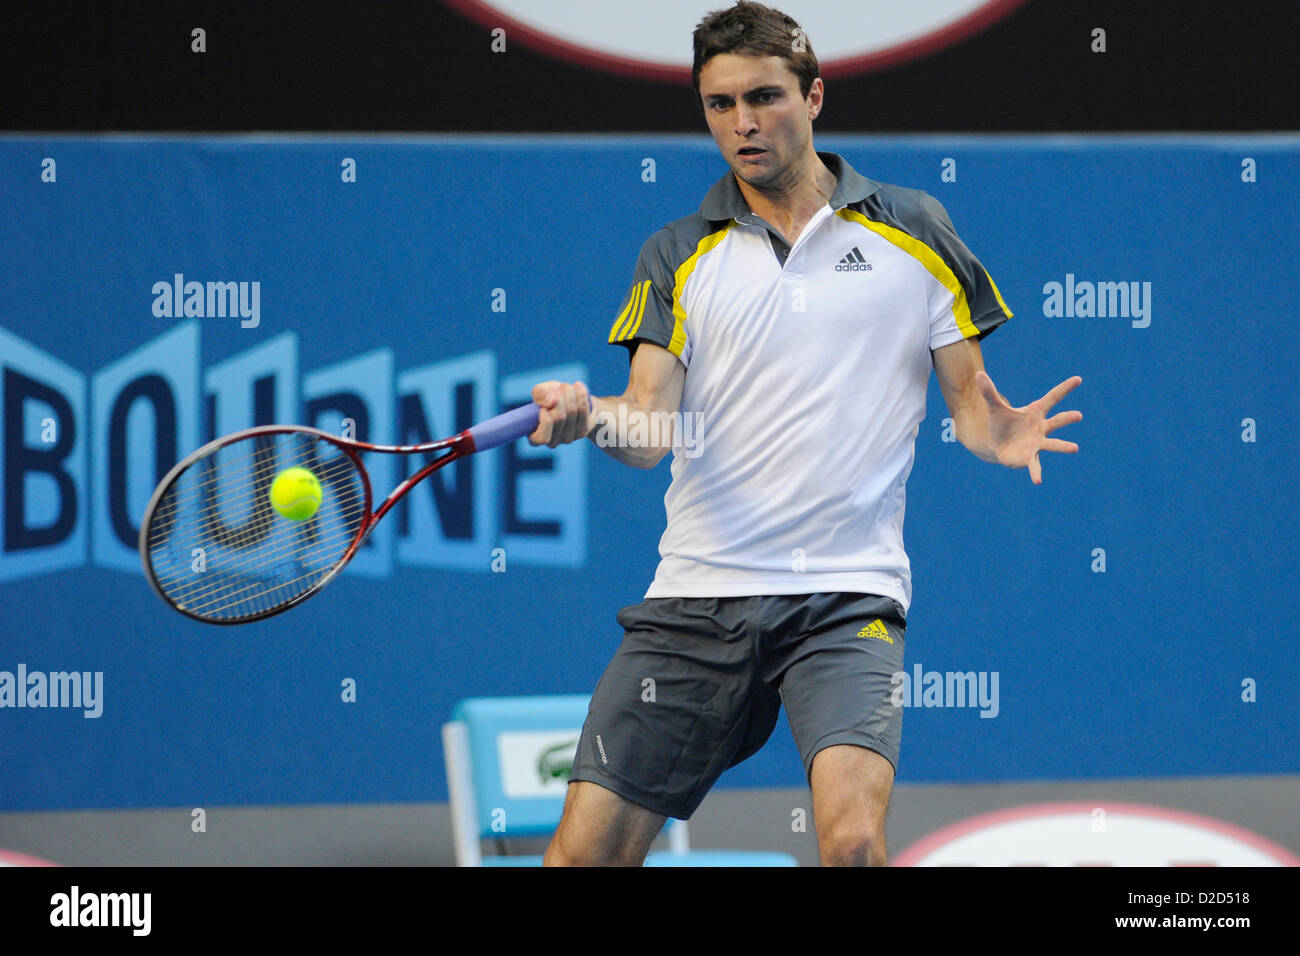 Gilles simon hi-res stock photography and images - Alamy